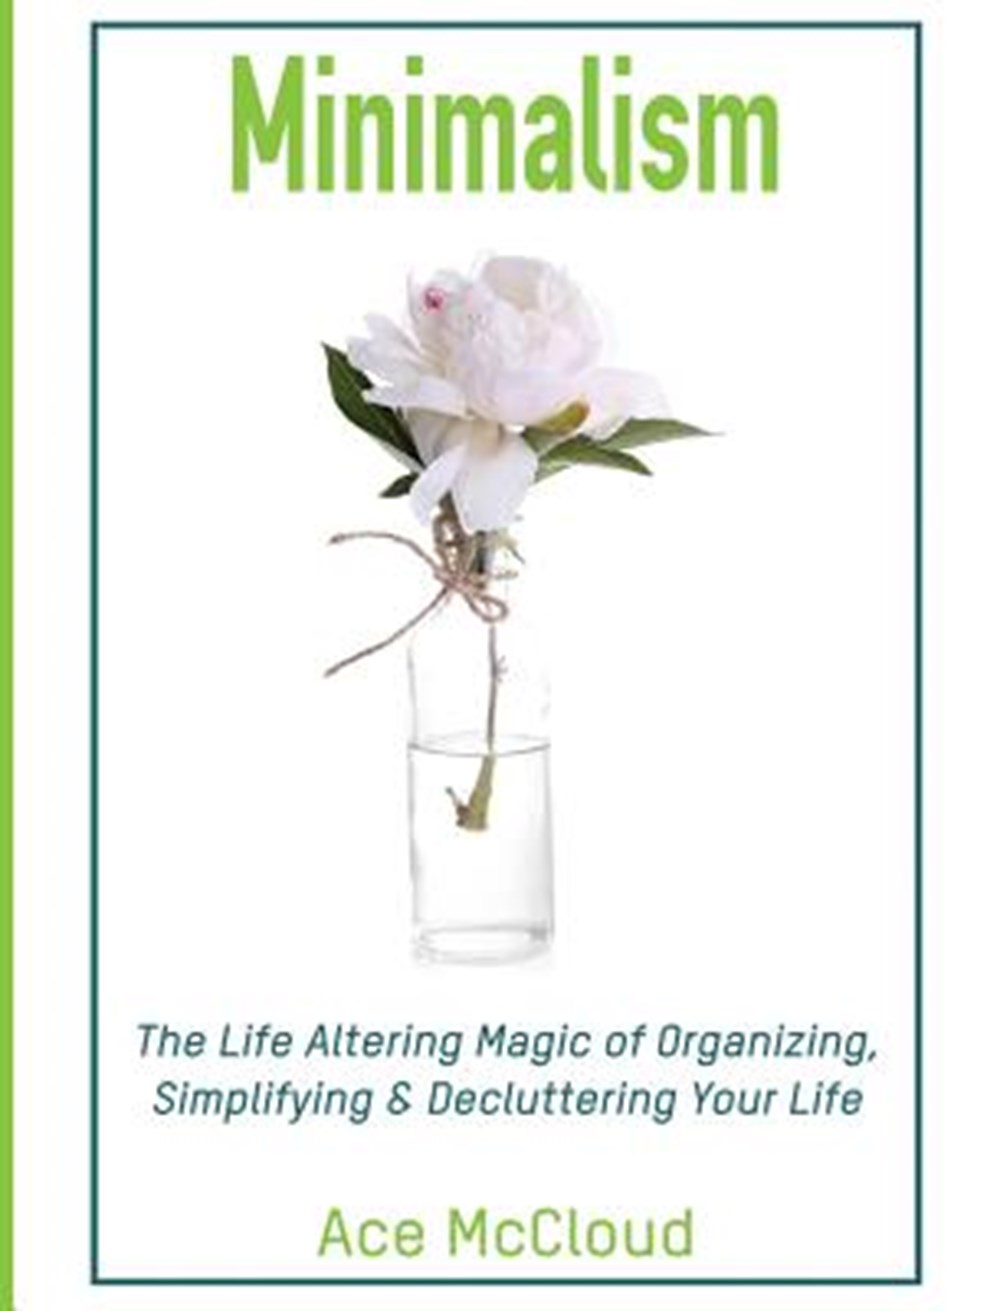 Minimalism The Life Altering Magic of Organizing, Simplifying & Decluttering Your Life